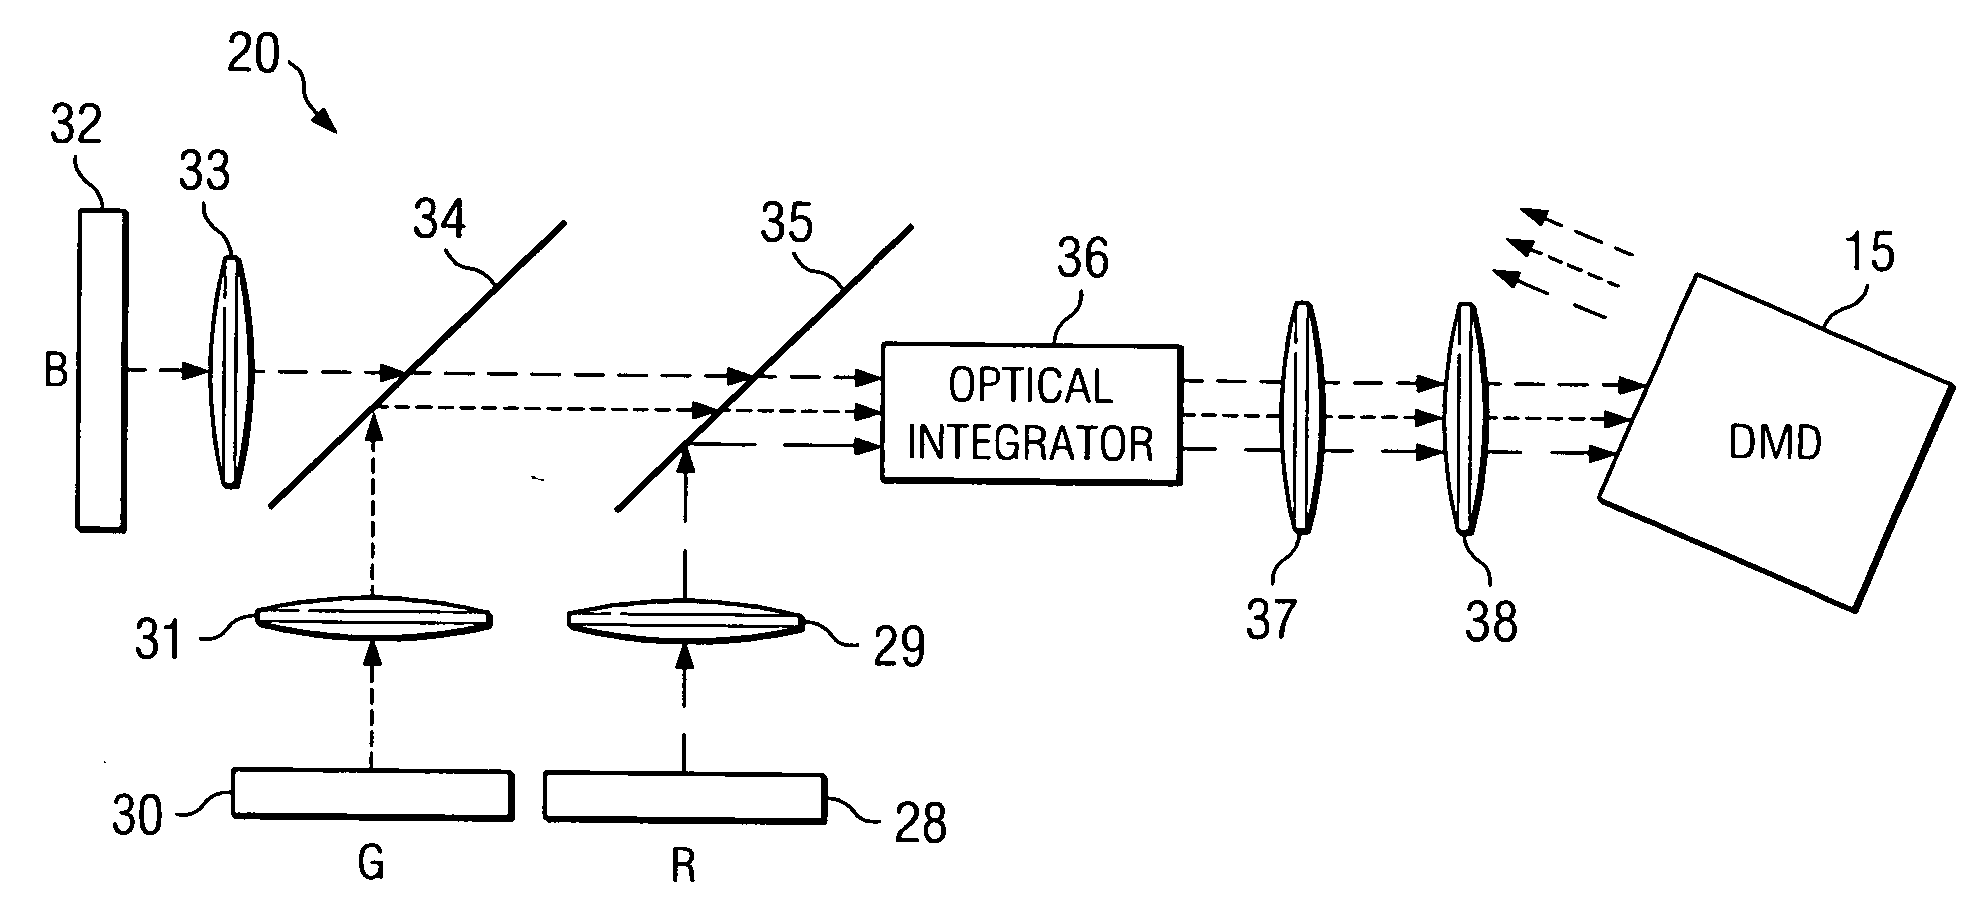 Method of combining dispersed light sources for projection display